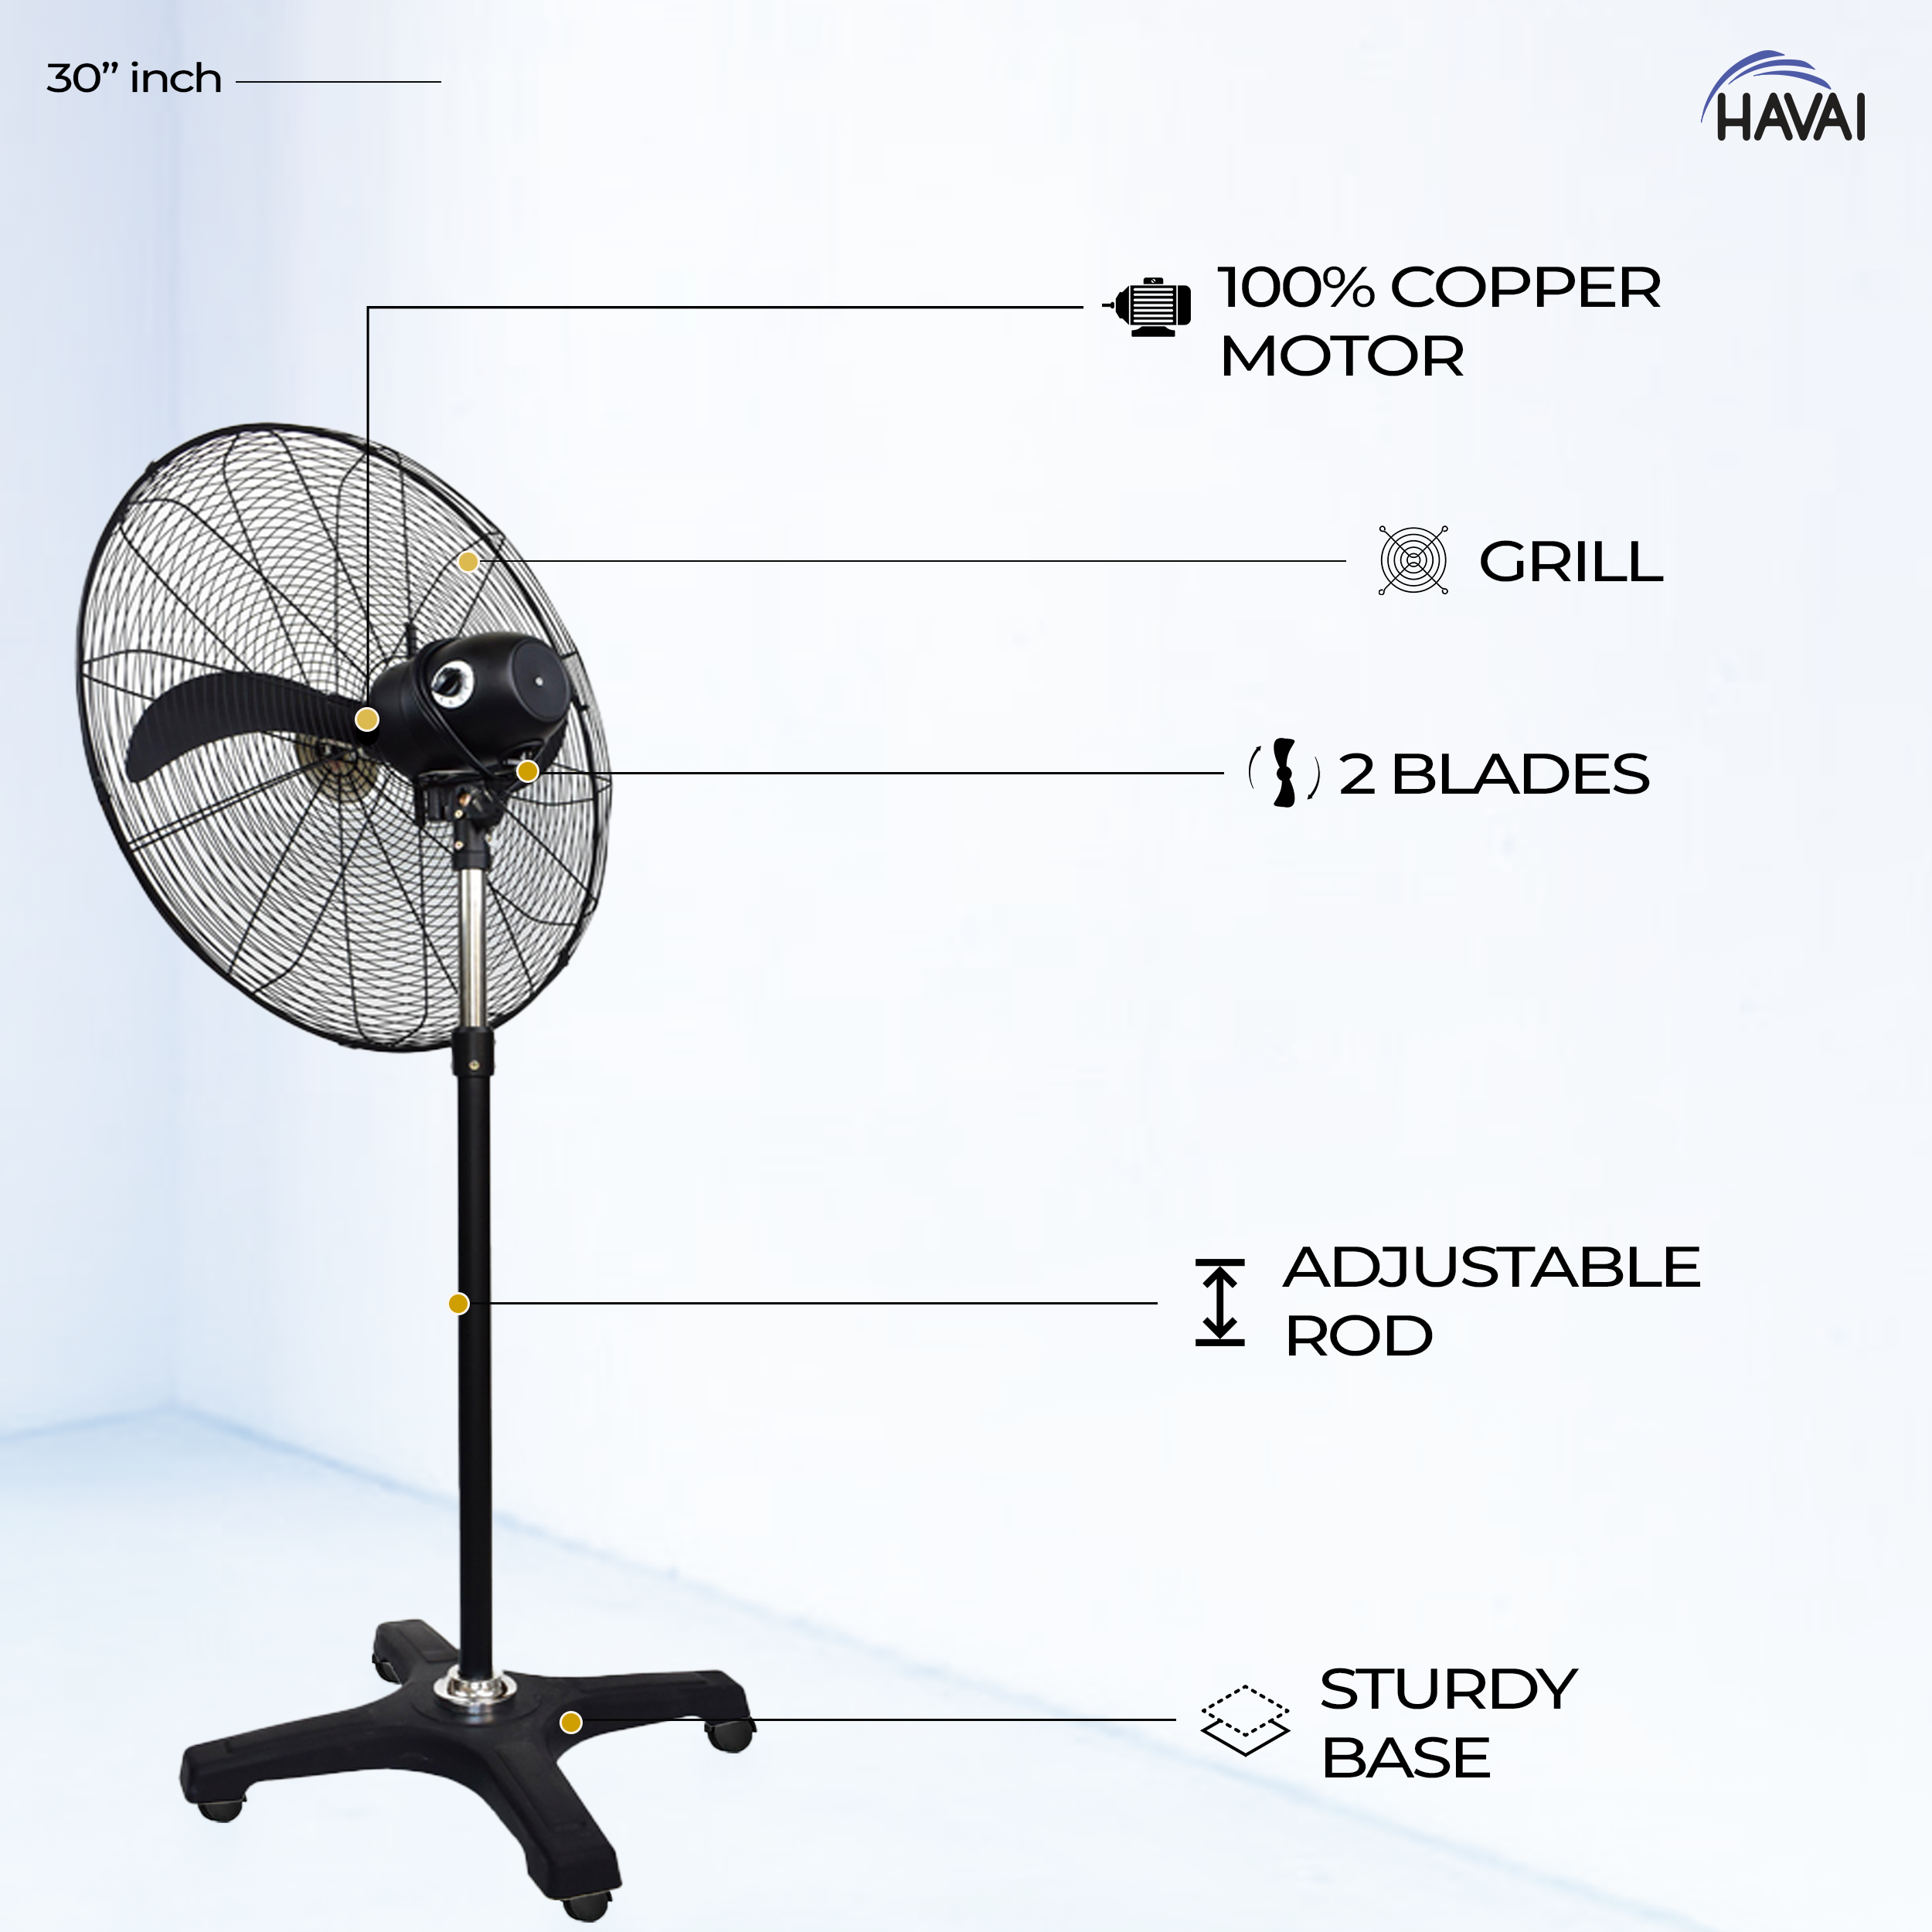 Havai BLDC Pedestal Fan 30 Inch, 50% Savings On Electricity, High Velocity, Heavy Duty Metal For Industrial, Commercial And Residential Use, Assembly Included , Black